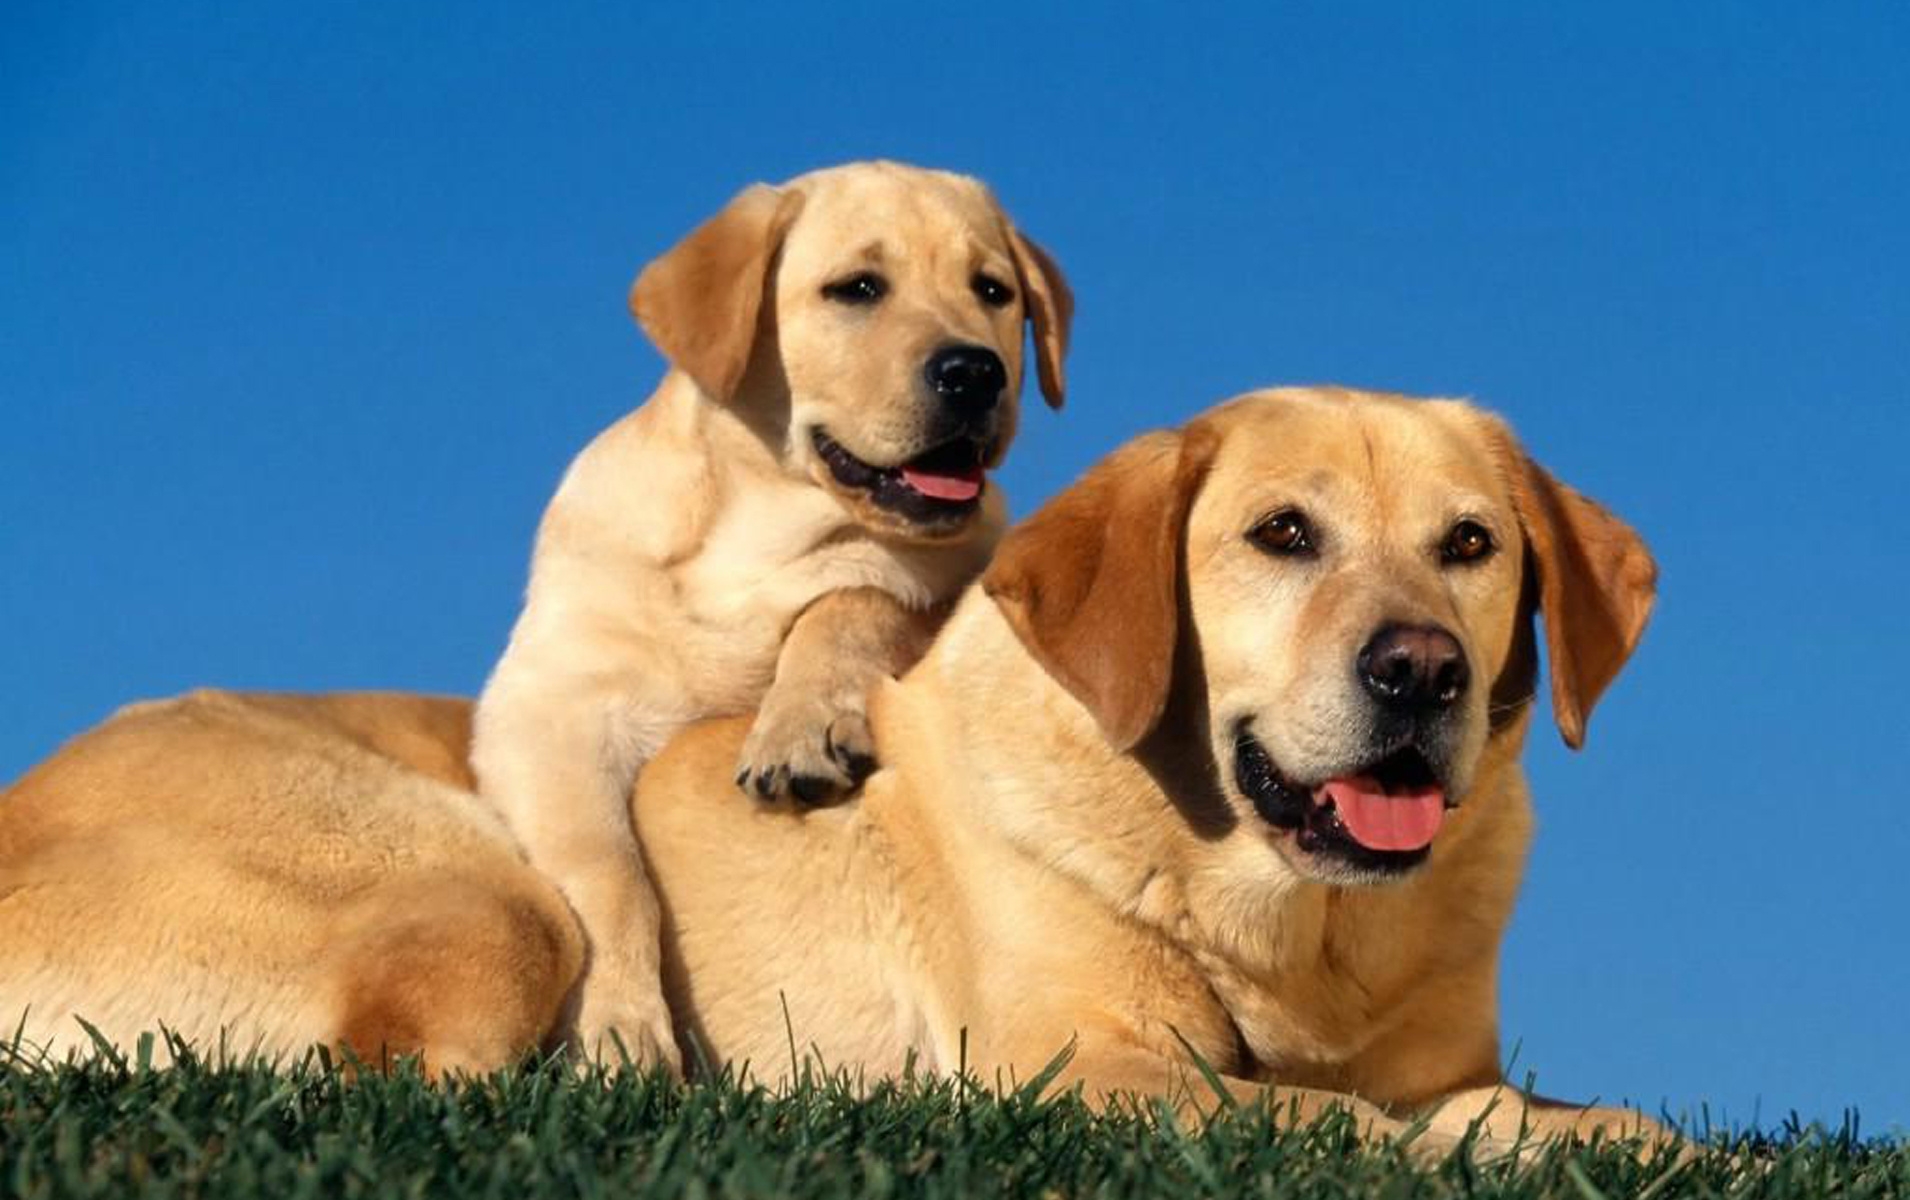 care, animals, dogs, young, couple, pair, puppy, joey, labradors